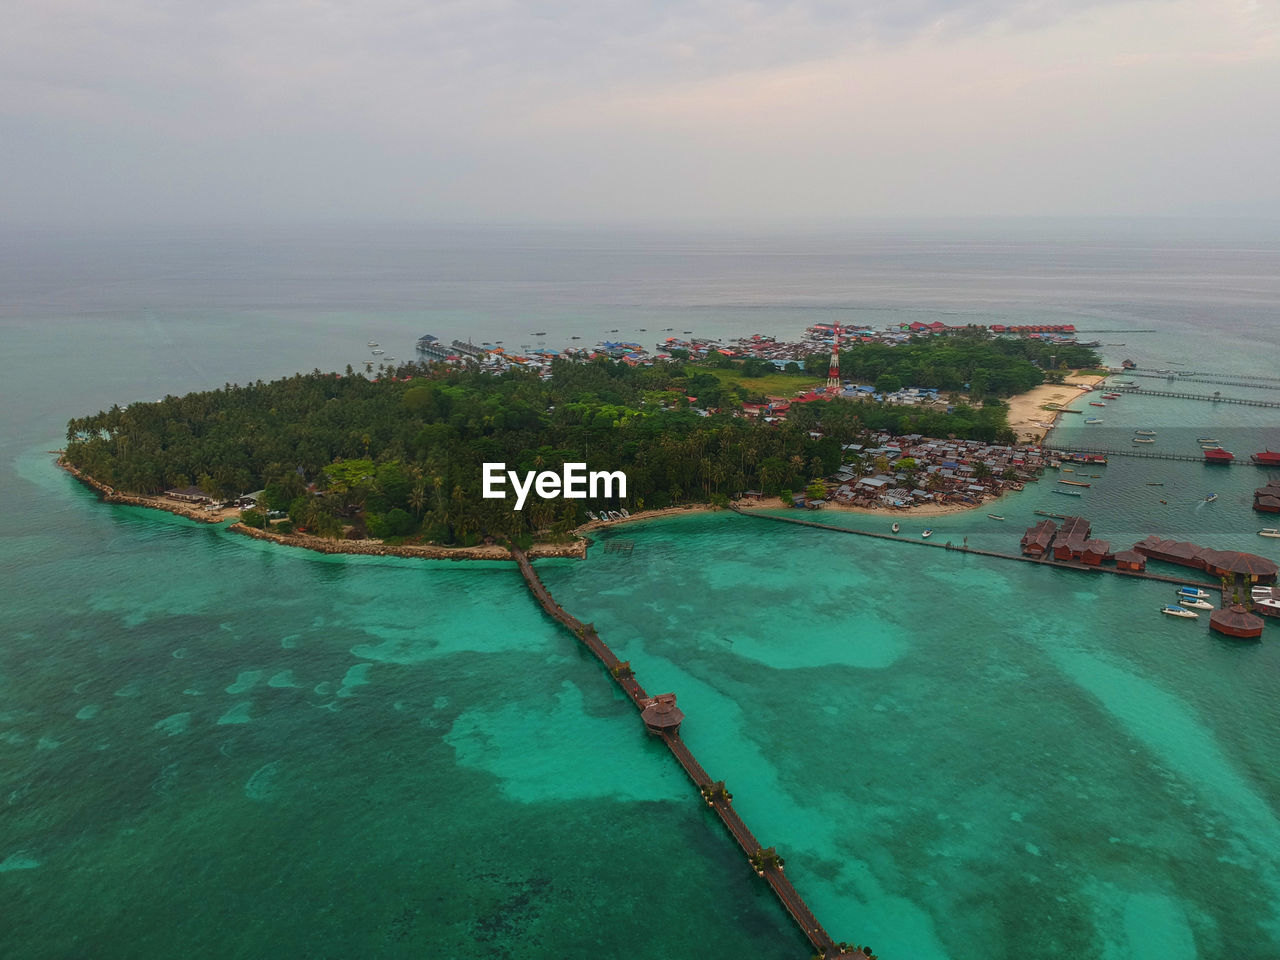 Mabul Island Aerial Shot Drone  Island Life Sky And Clouds Aerial Aerial Photography Aerial View Birdseyeview Drone Photography Dronephotography Droneshot Island Mabul Malaysia Malaysian Nature Sabah Sea Sea And Sky Seascape Semporna Sky Sunrise Water Water Bungalows